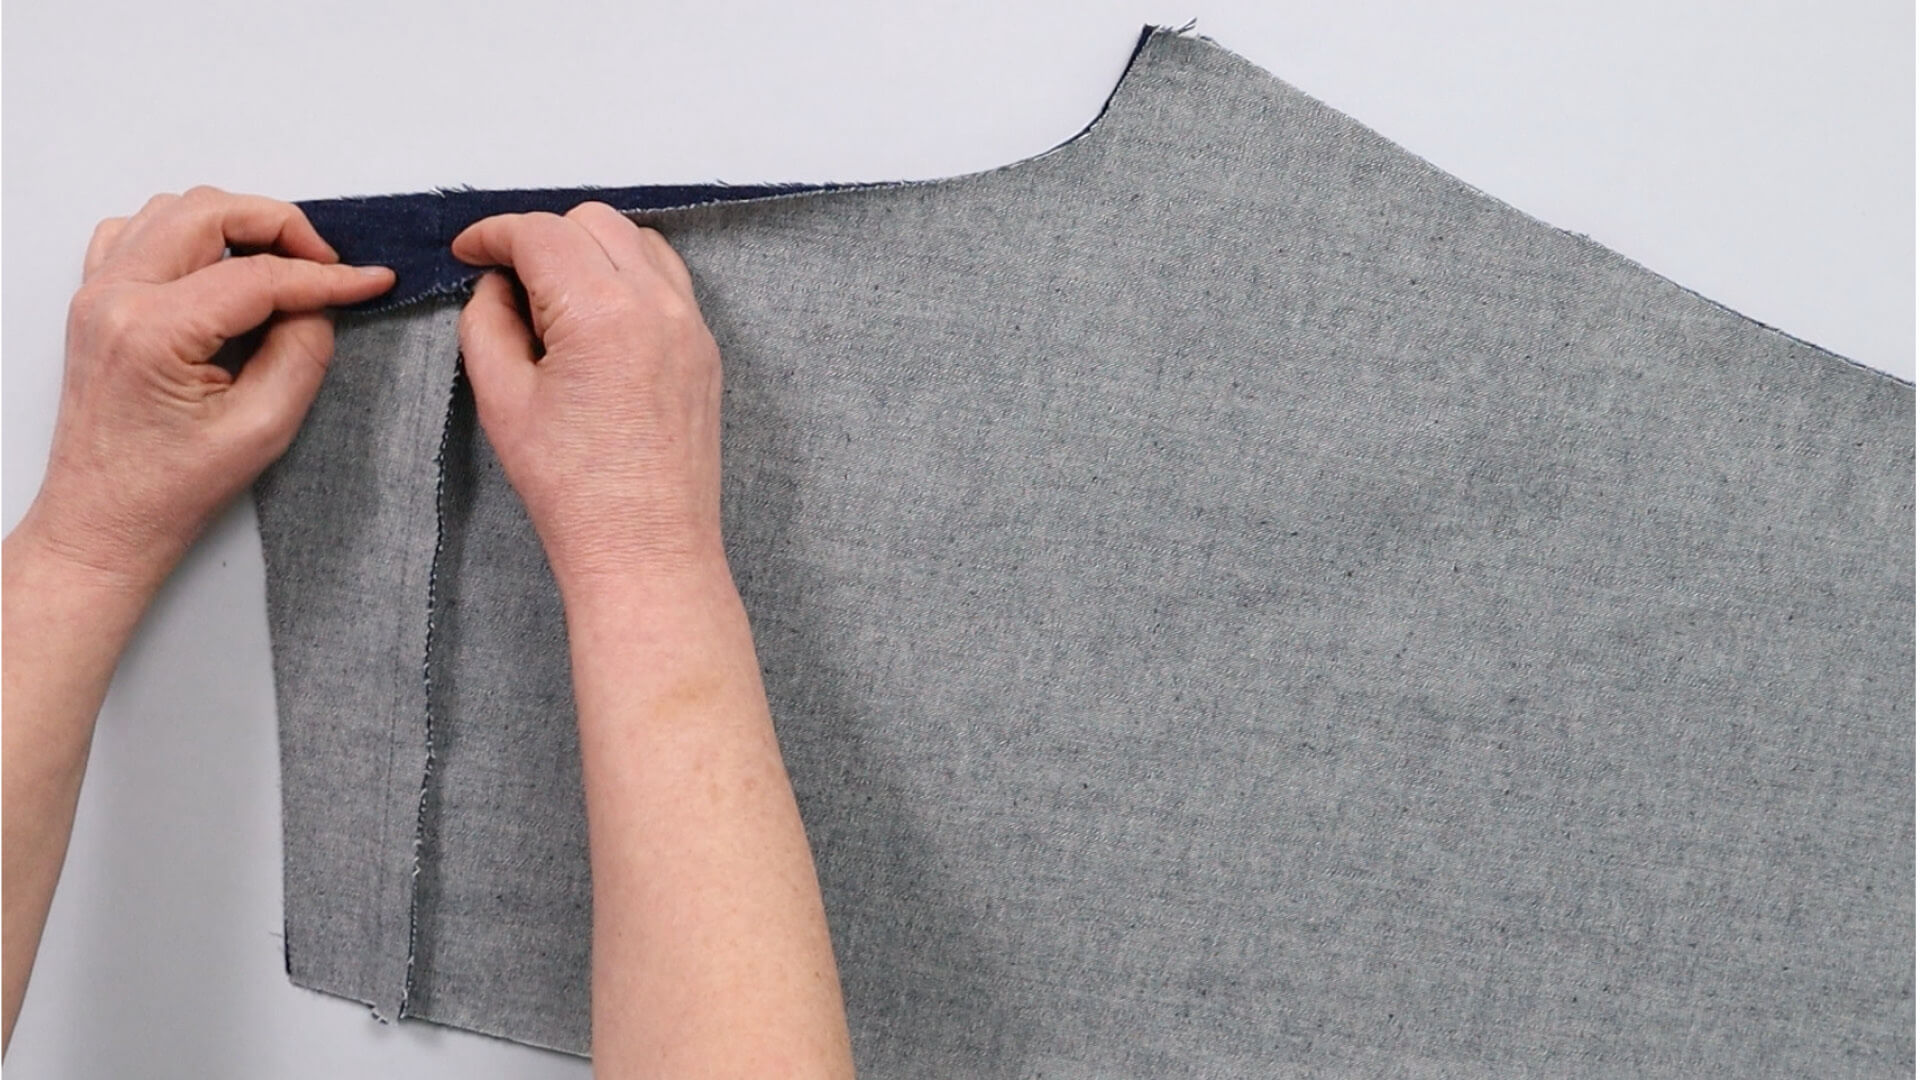 Pin the back together with yoke seams matching